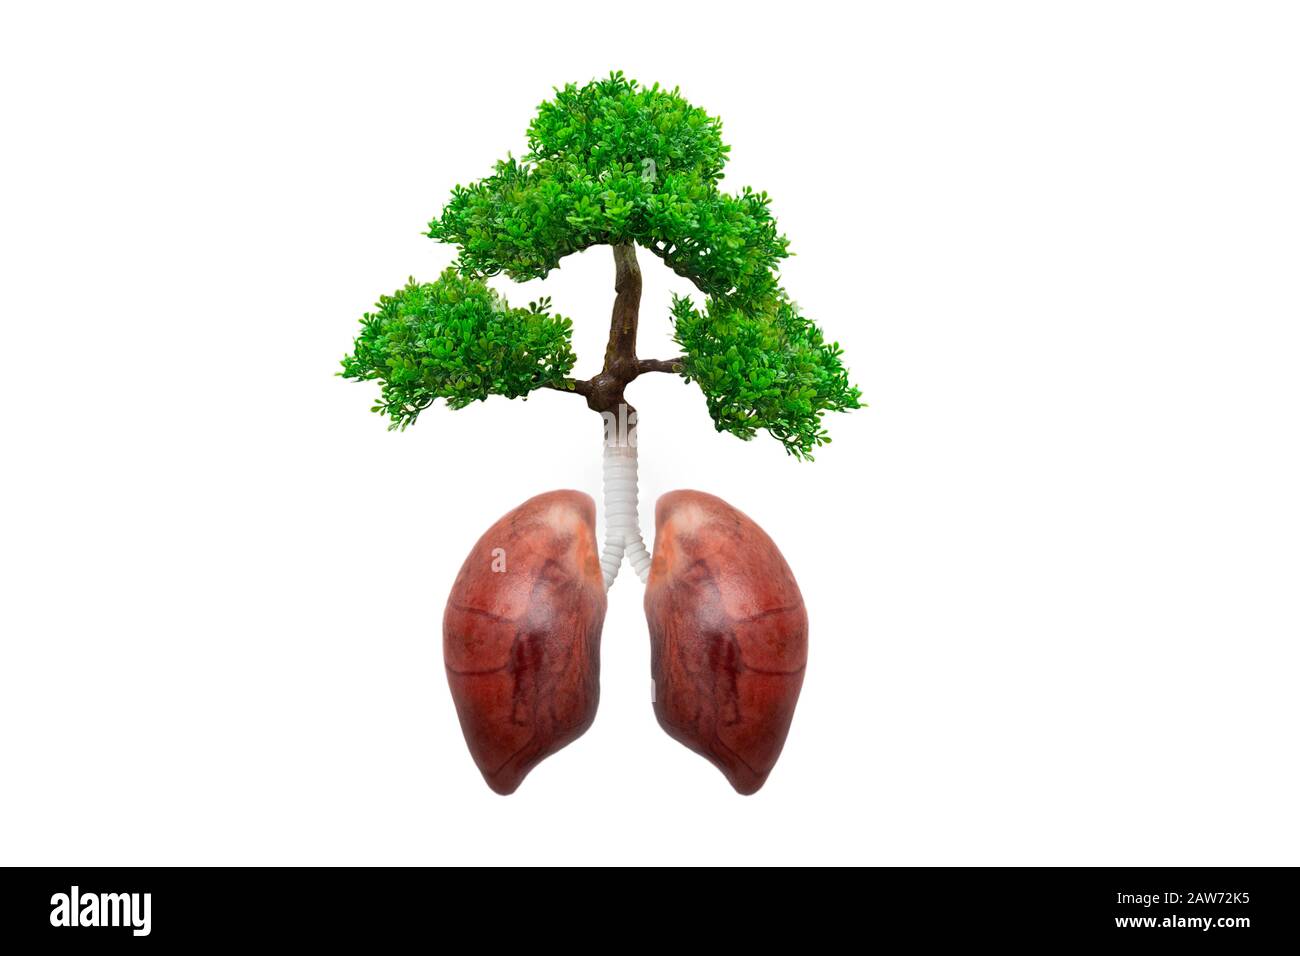 Lungs tree.Healthy life concept. Forest protection concept good environment Stock Photo